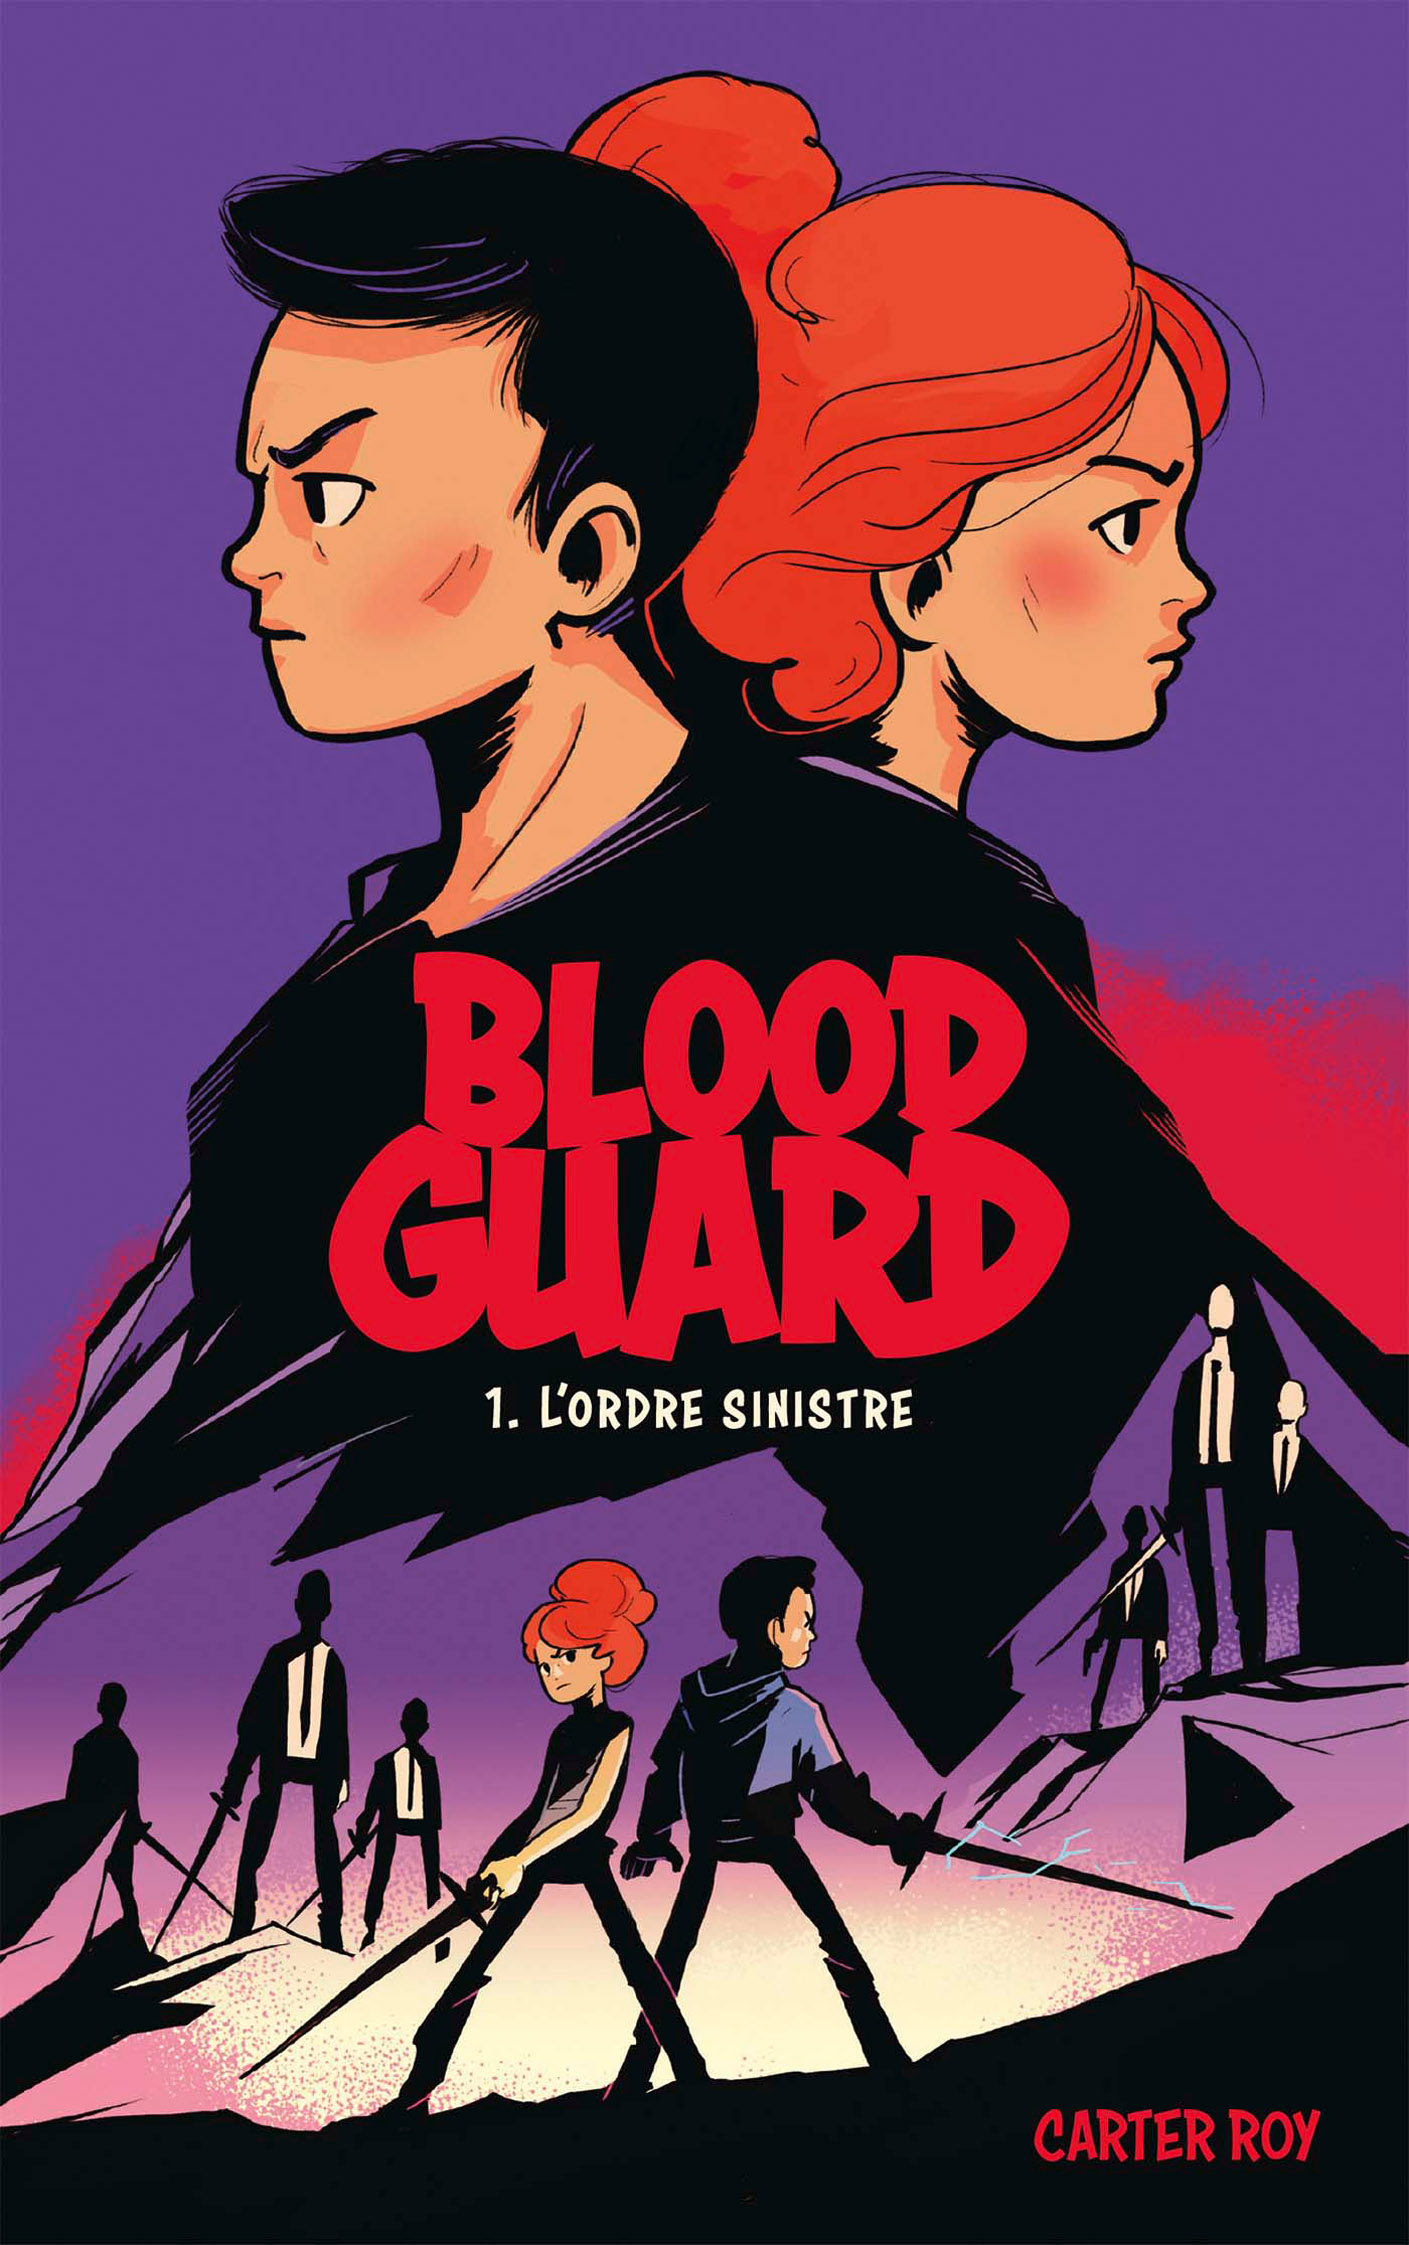 the blood guard series